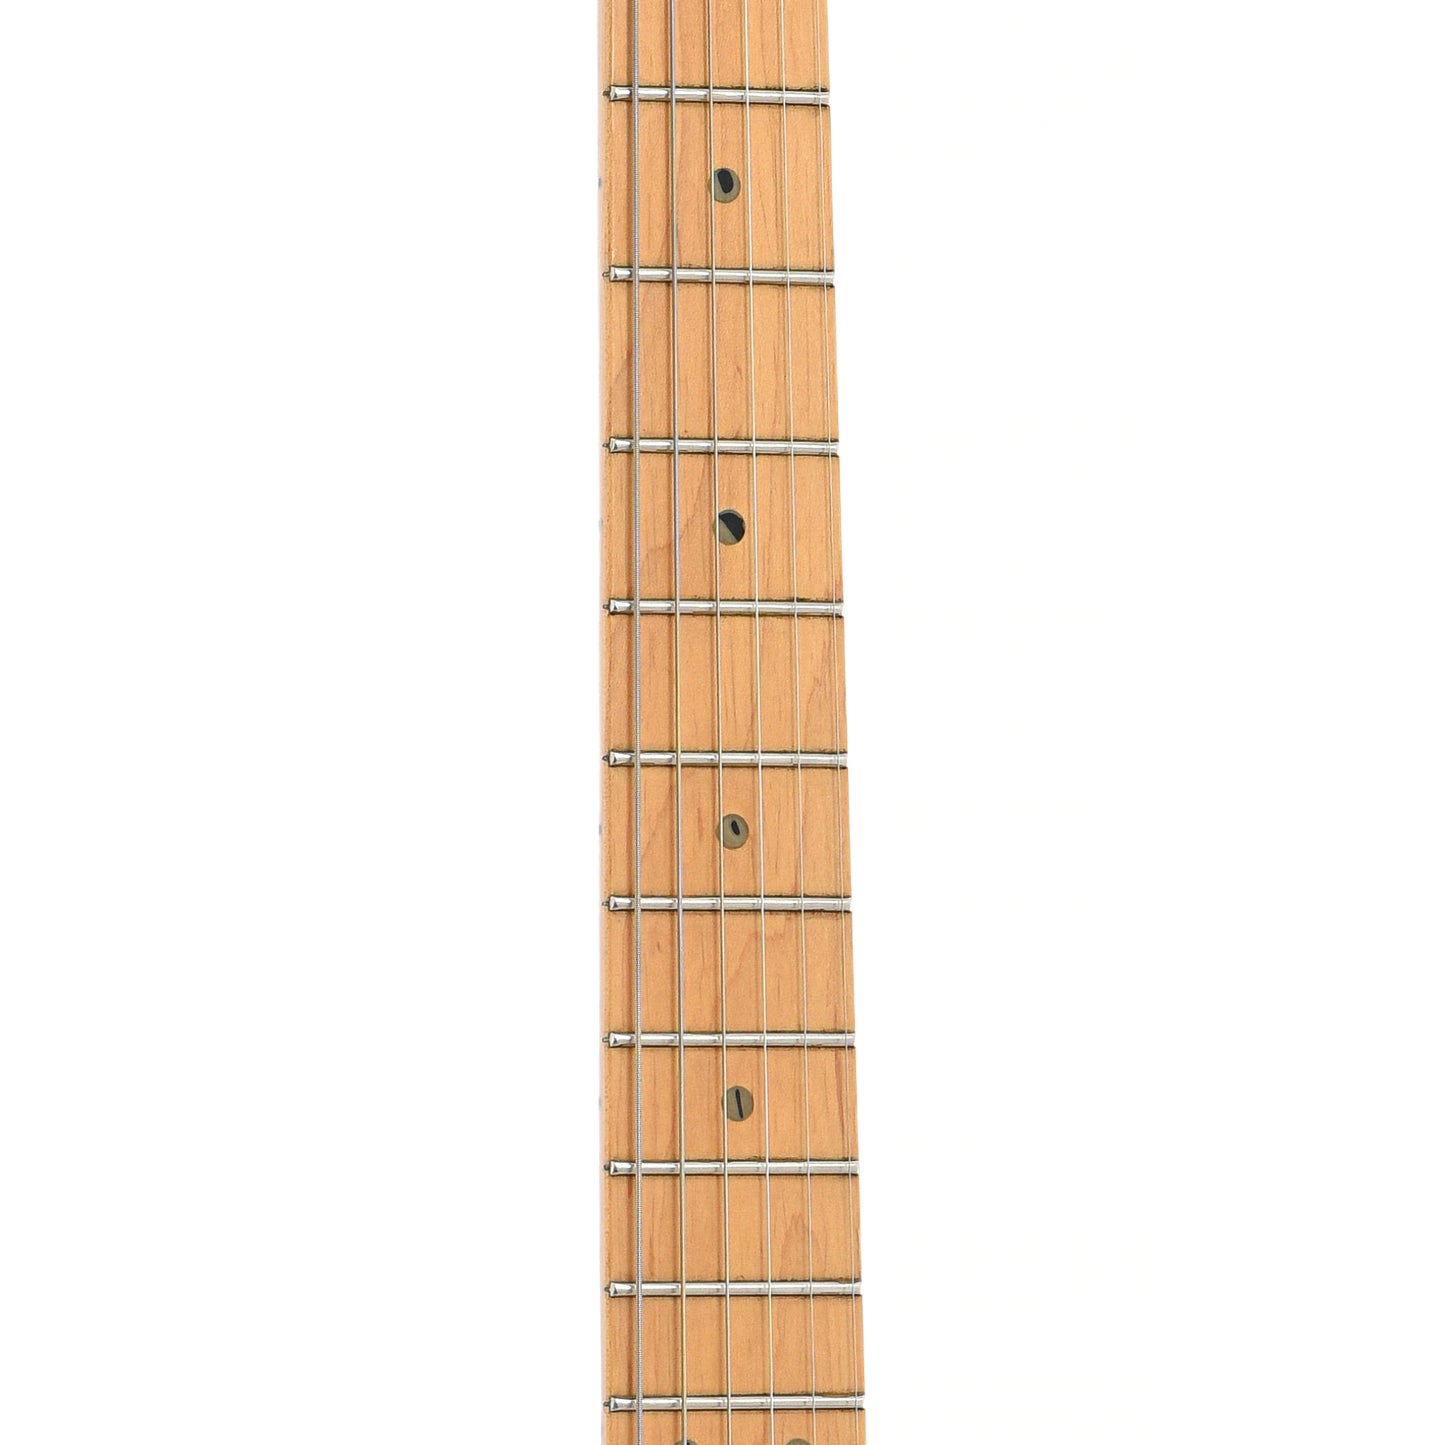 Fretboard of Fender American Series Stratocaster Electric Guitar (2001)